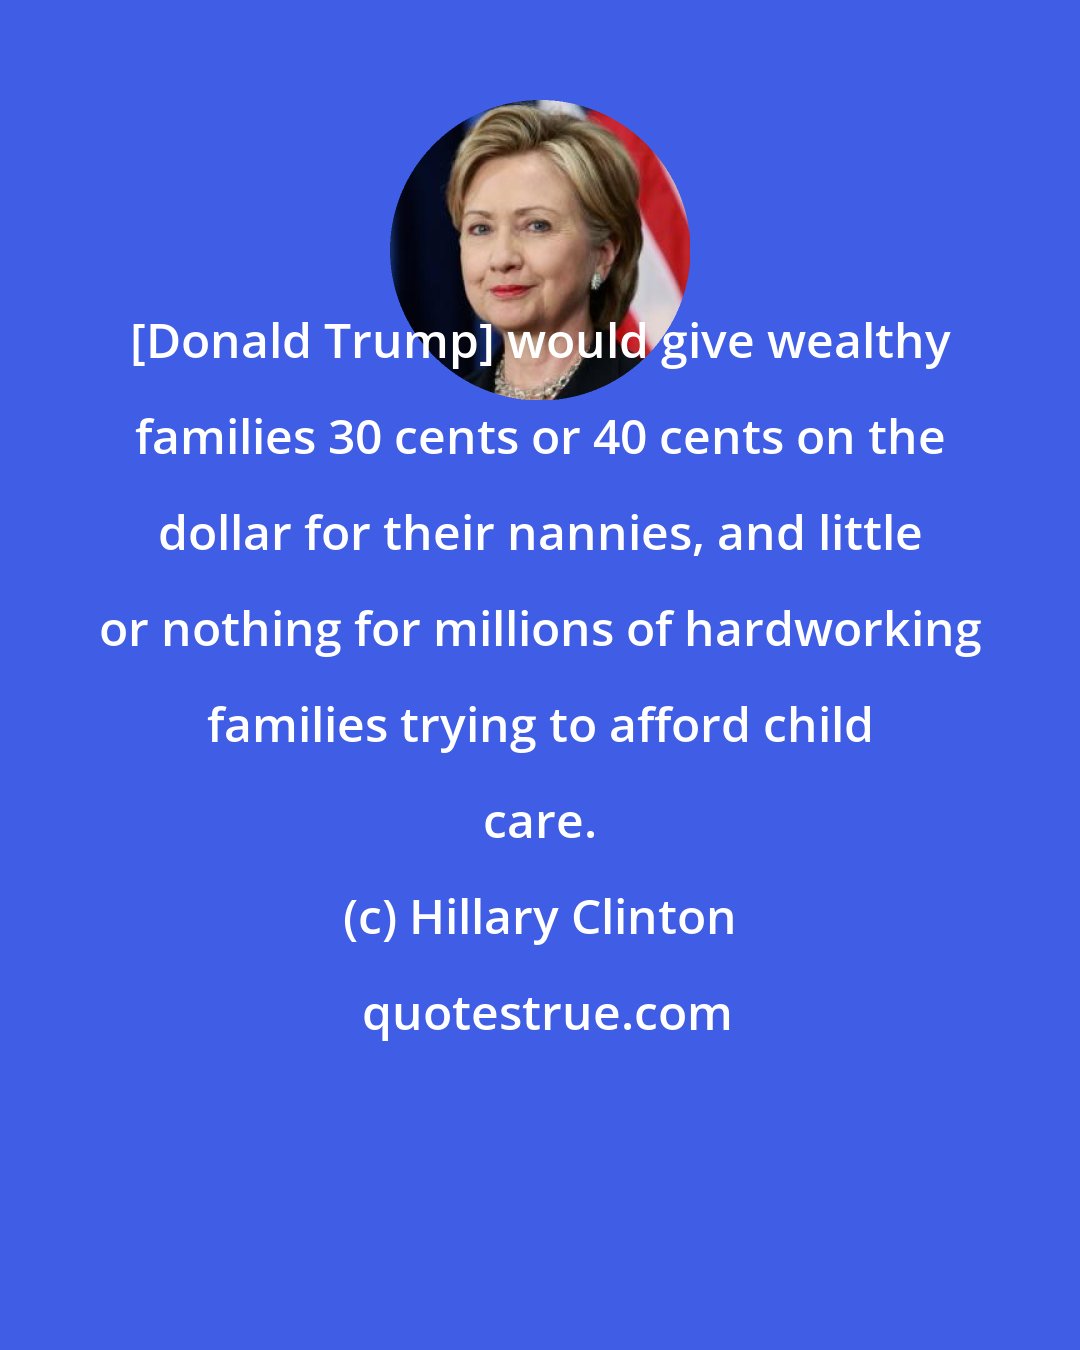 Hillary Clinton: [Donald Trump] would give wealthy families 30 cents or 40 cents on the dollar for their nannies, and little or nothing for millions of hardworking families trying to afford child care.